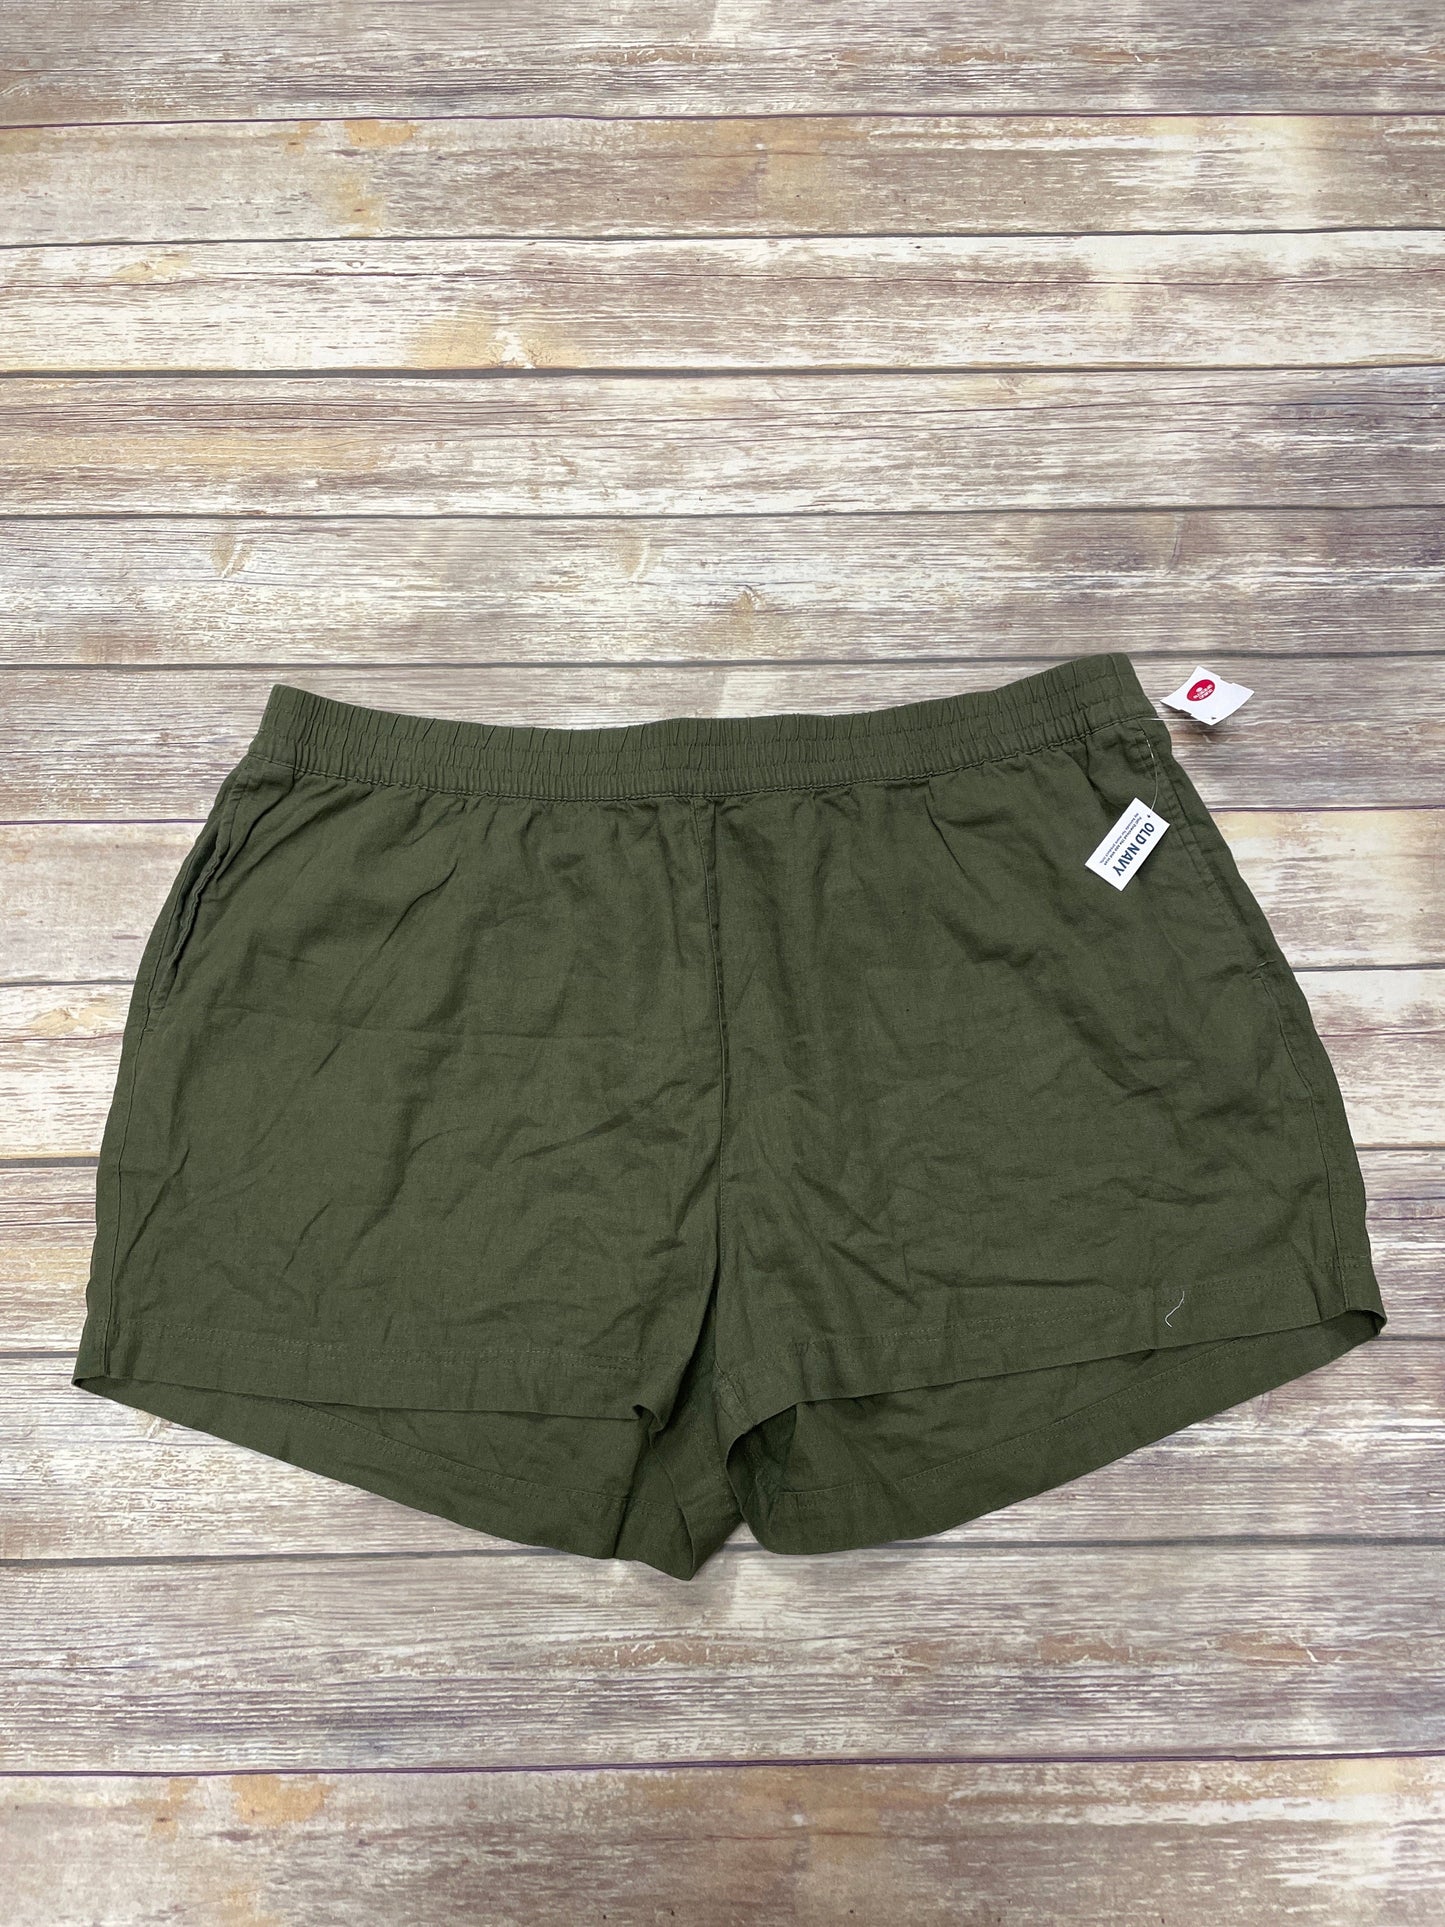 Green Shorts Old Navy, Size 3x